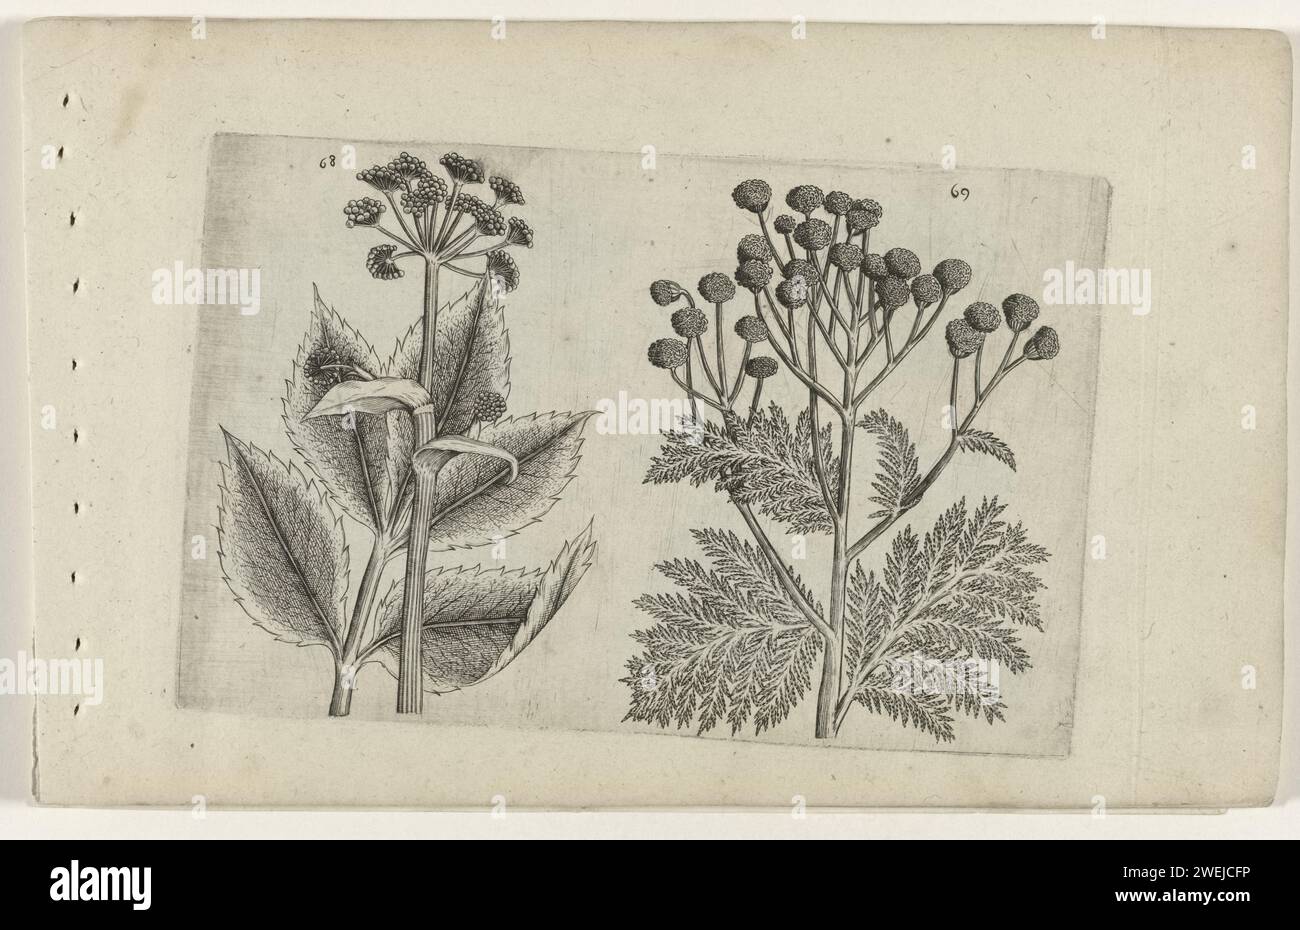 Hertswort and farmer's worm herb, Crispijn van de Passe (I) (attributed to), after Crispijn van de Passe (i), 1600 - 1604 print Hertswort (Seseli Lebanotis) and farmworm herb (tanacetum vulgare), numbered 68 and 69.  paper engraving plants and herbs: moon carrot. flowers: tansy. botany Stock Photo